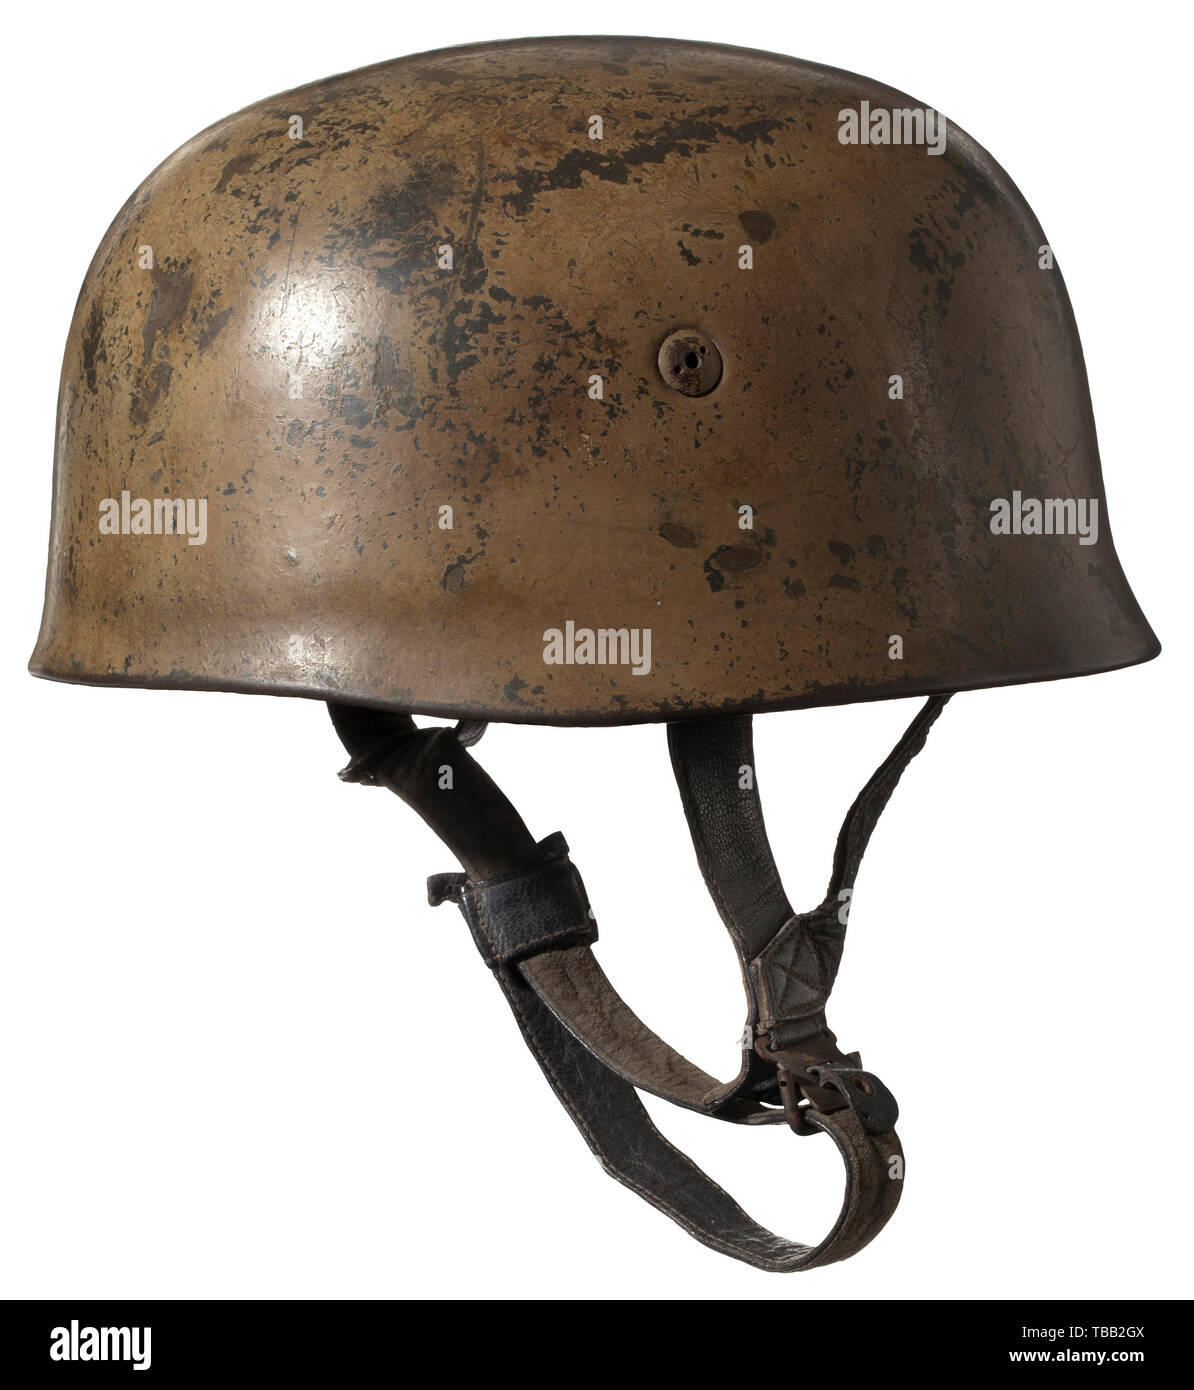 A helmet for paratroopers In typical paint for members of the Afrika Korps and southern front. The skull with ca. 80% intact original paint, the interior stamped 'ET68' and '1421', four cheese-head screws with ventilation openings and two holes for the pin wrench. Aluminium inner ring with light rubber padding, the leather lining discoloured due to wear, with ink stamping 'Kopfgröße 57 - Stahlhaube 68' as well as designation 'Karl Helsler, Berlin C.2.' and 'D.R.G.M.S.'. The liner with hand-written name initials 'M.W.'. The leather strapping of th, Additional-Rights-Clearance-Info-Not-Available Stock Photo